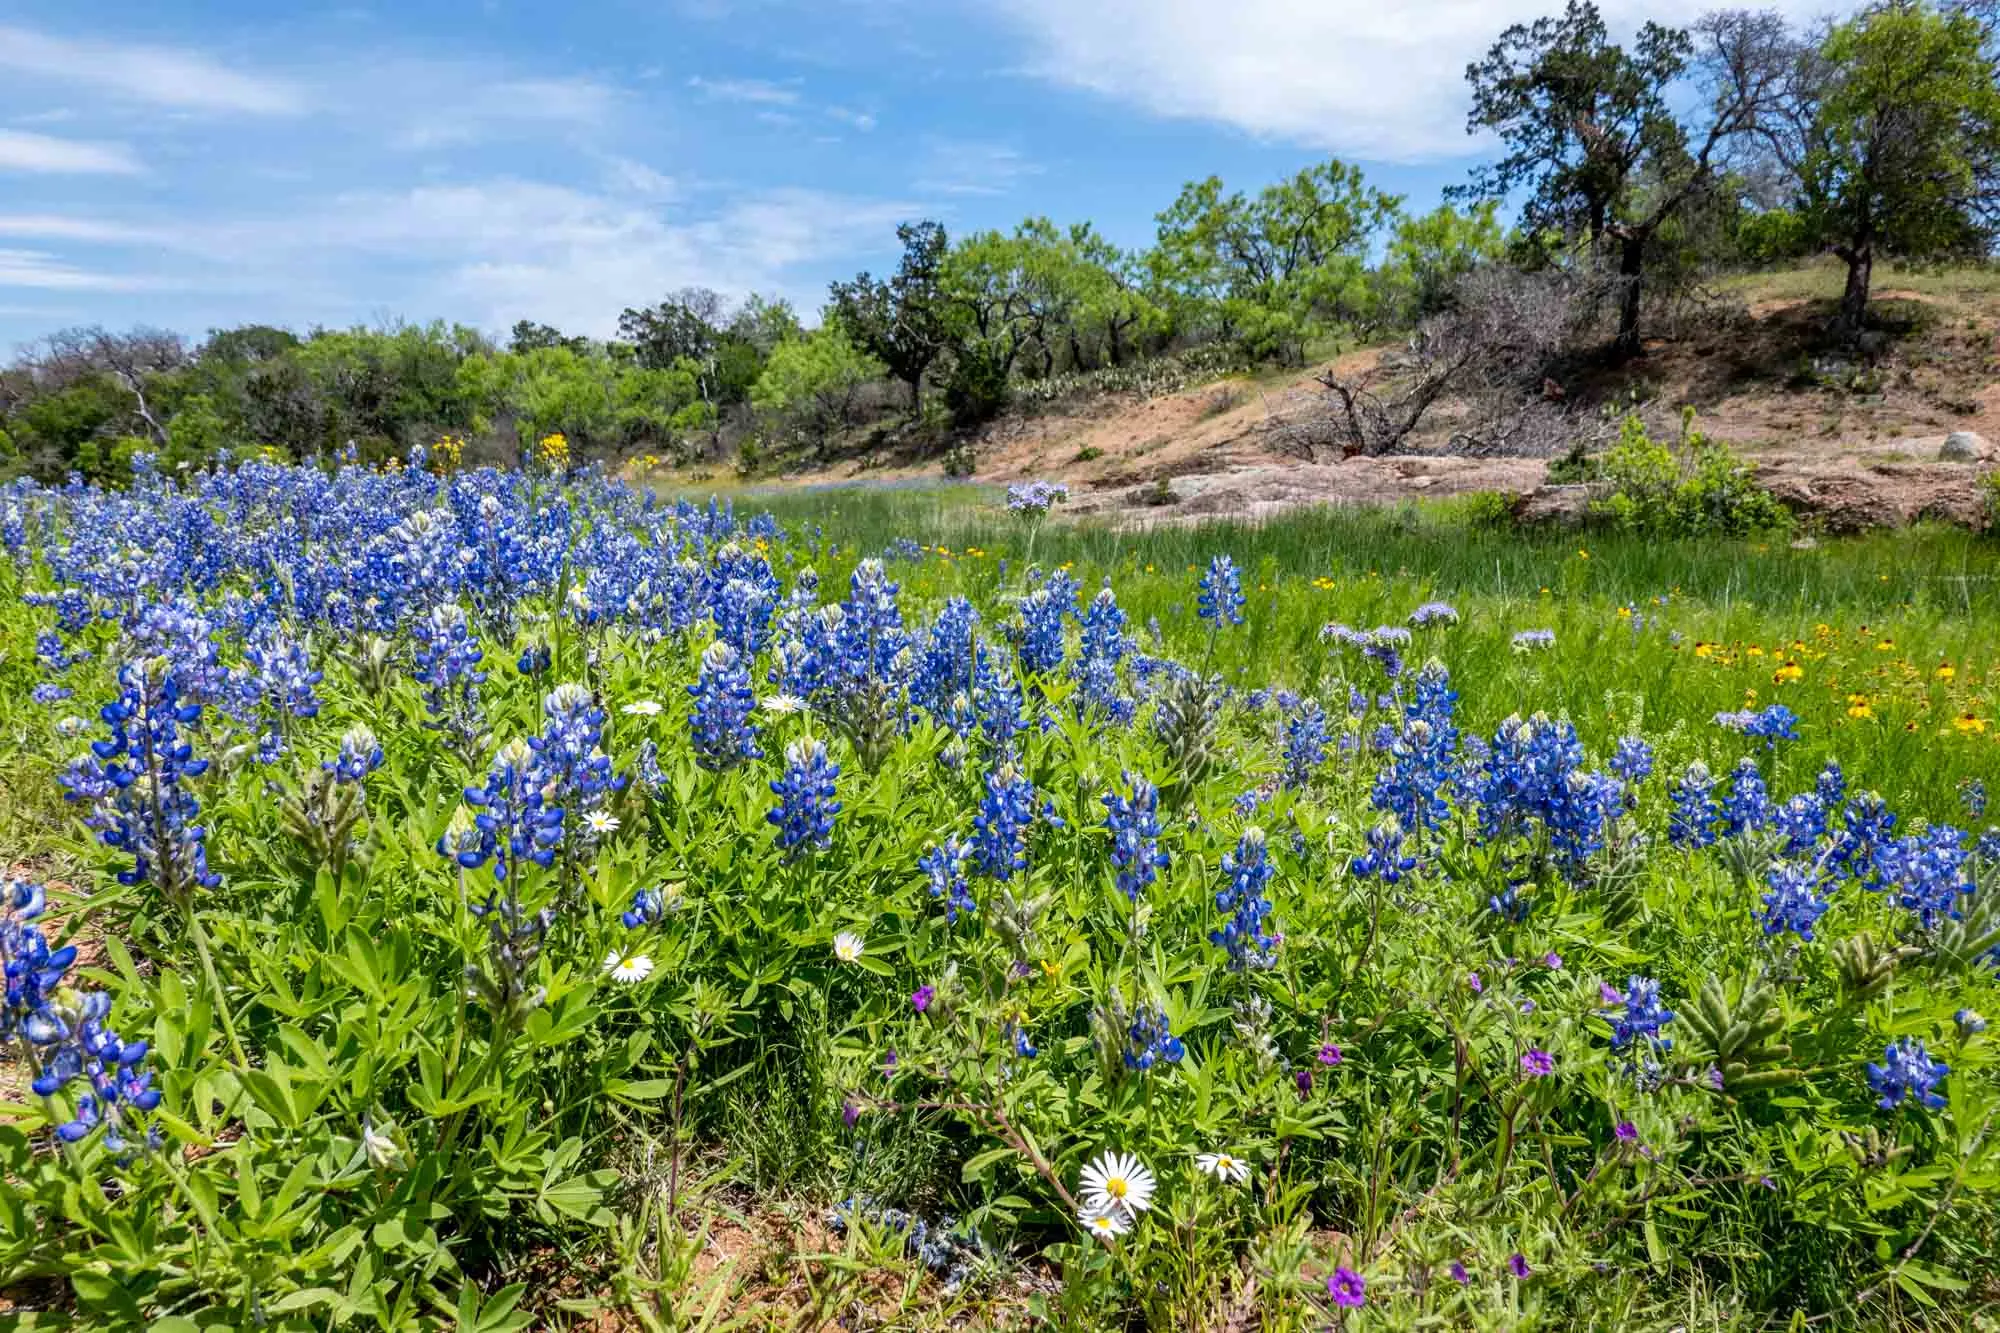 The Willow City Loop bluebonnets in bloom.